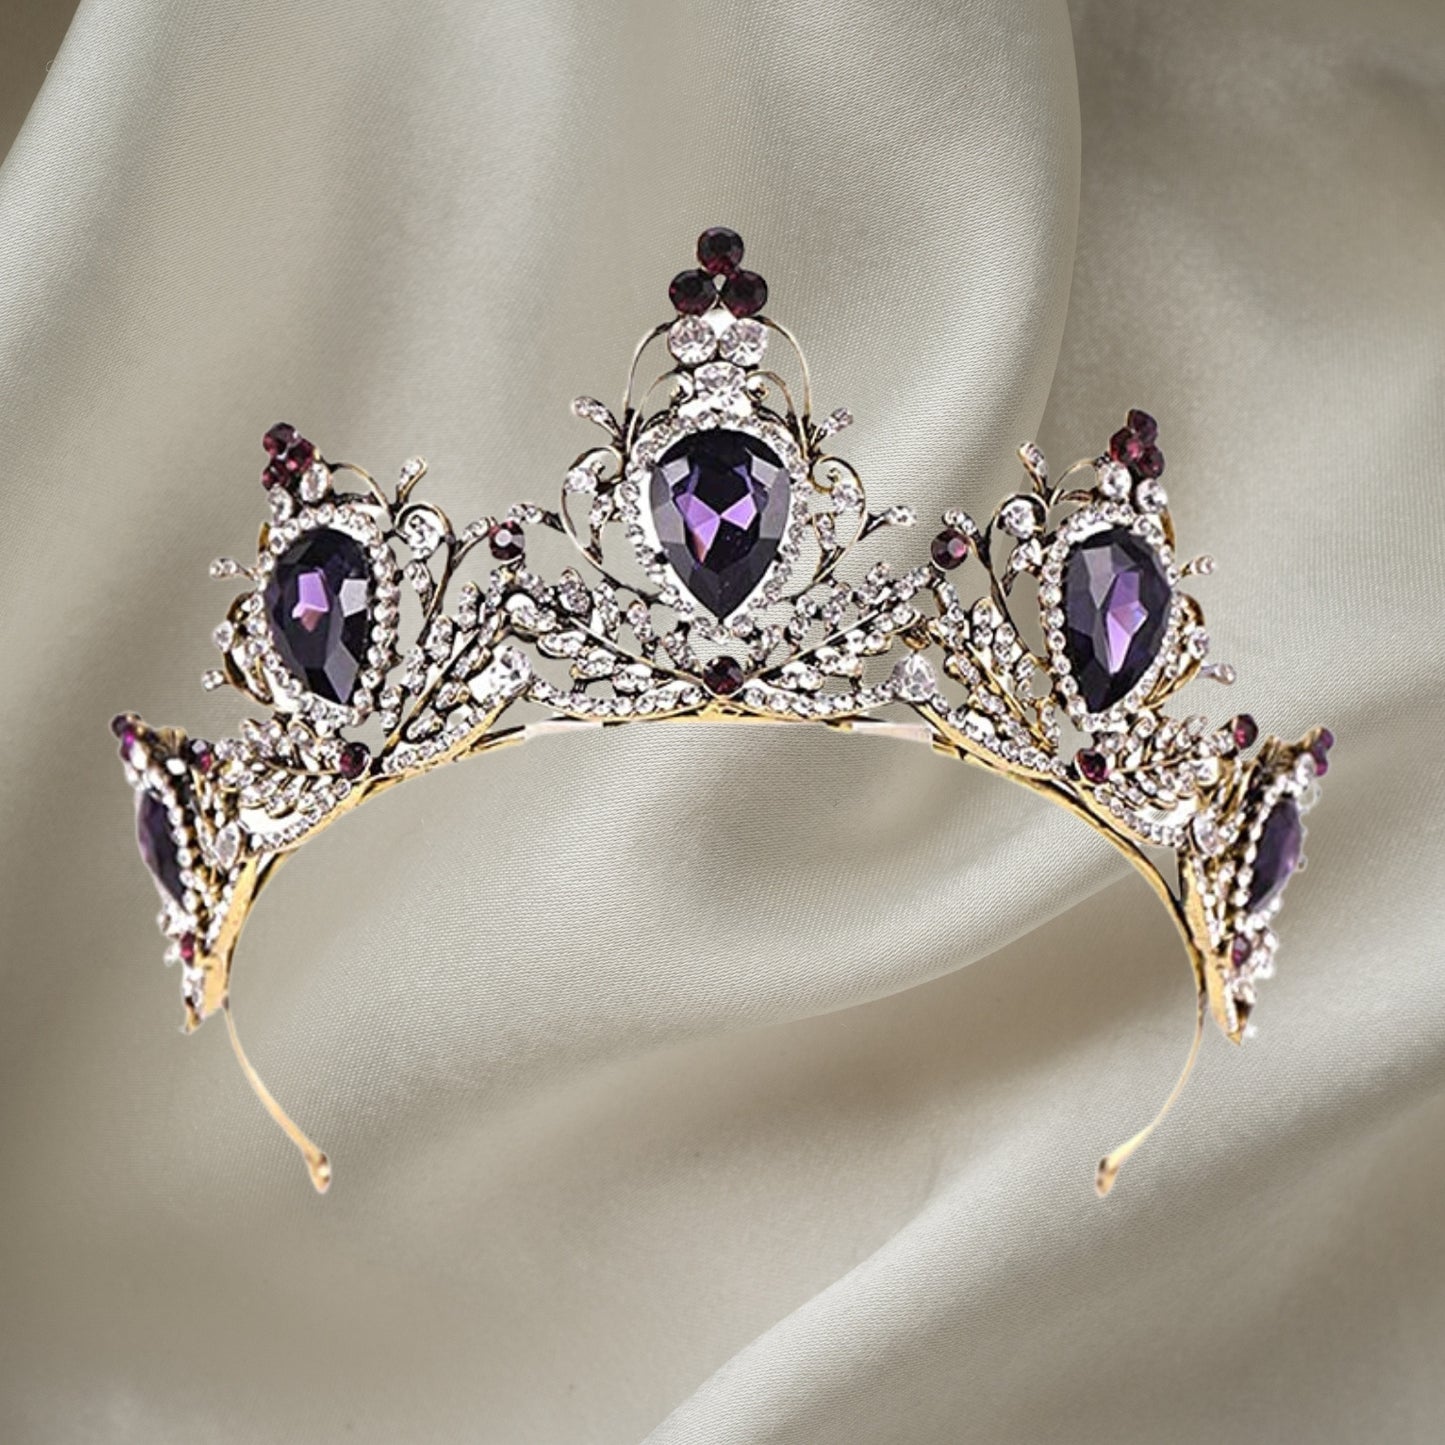 Baroque Wedding Crowns Purple Rhinestone Bridal Crown and Tiara Crystal Queen Crown Halloween Costume Party Hair Accessories for Women and Girls